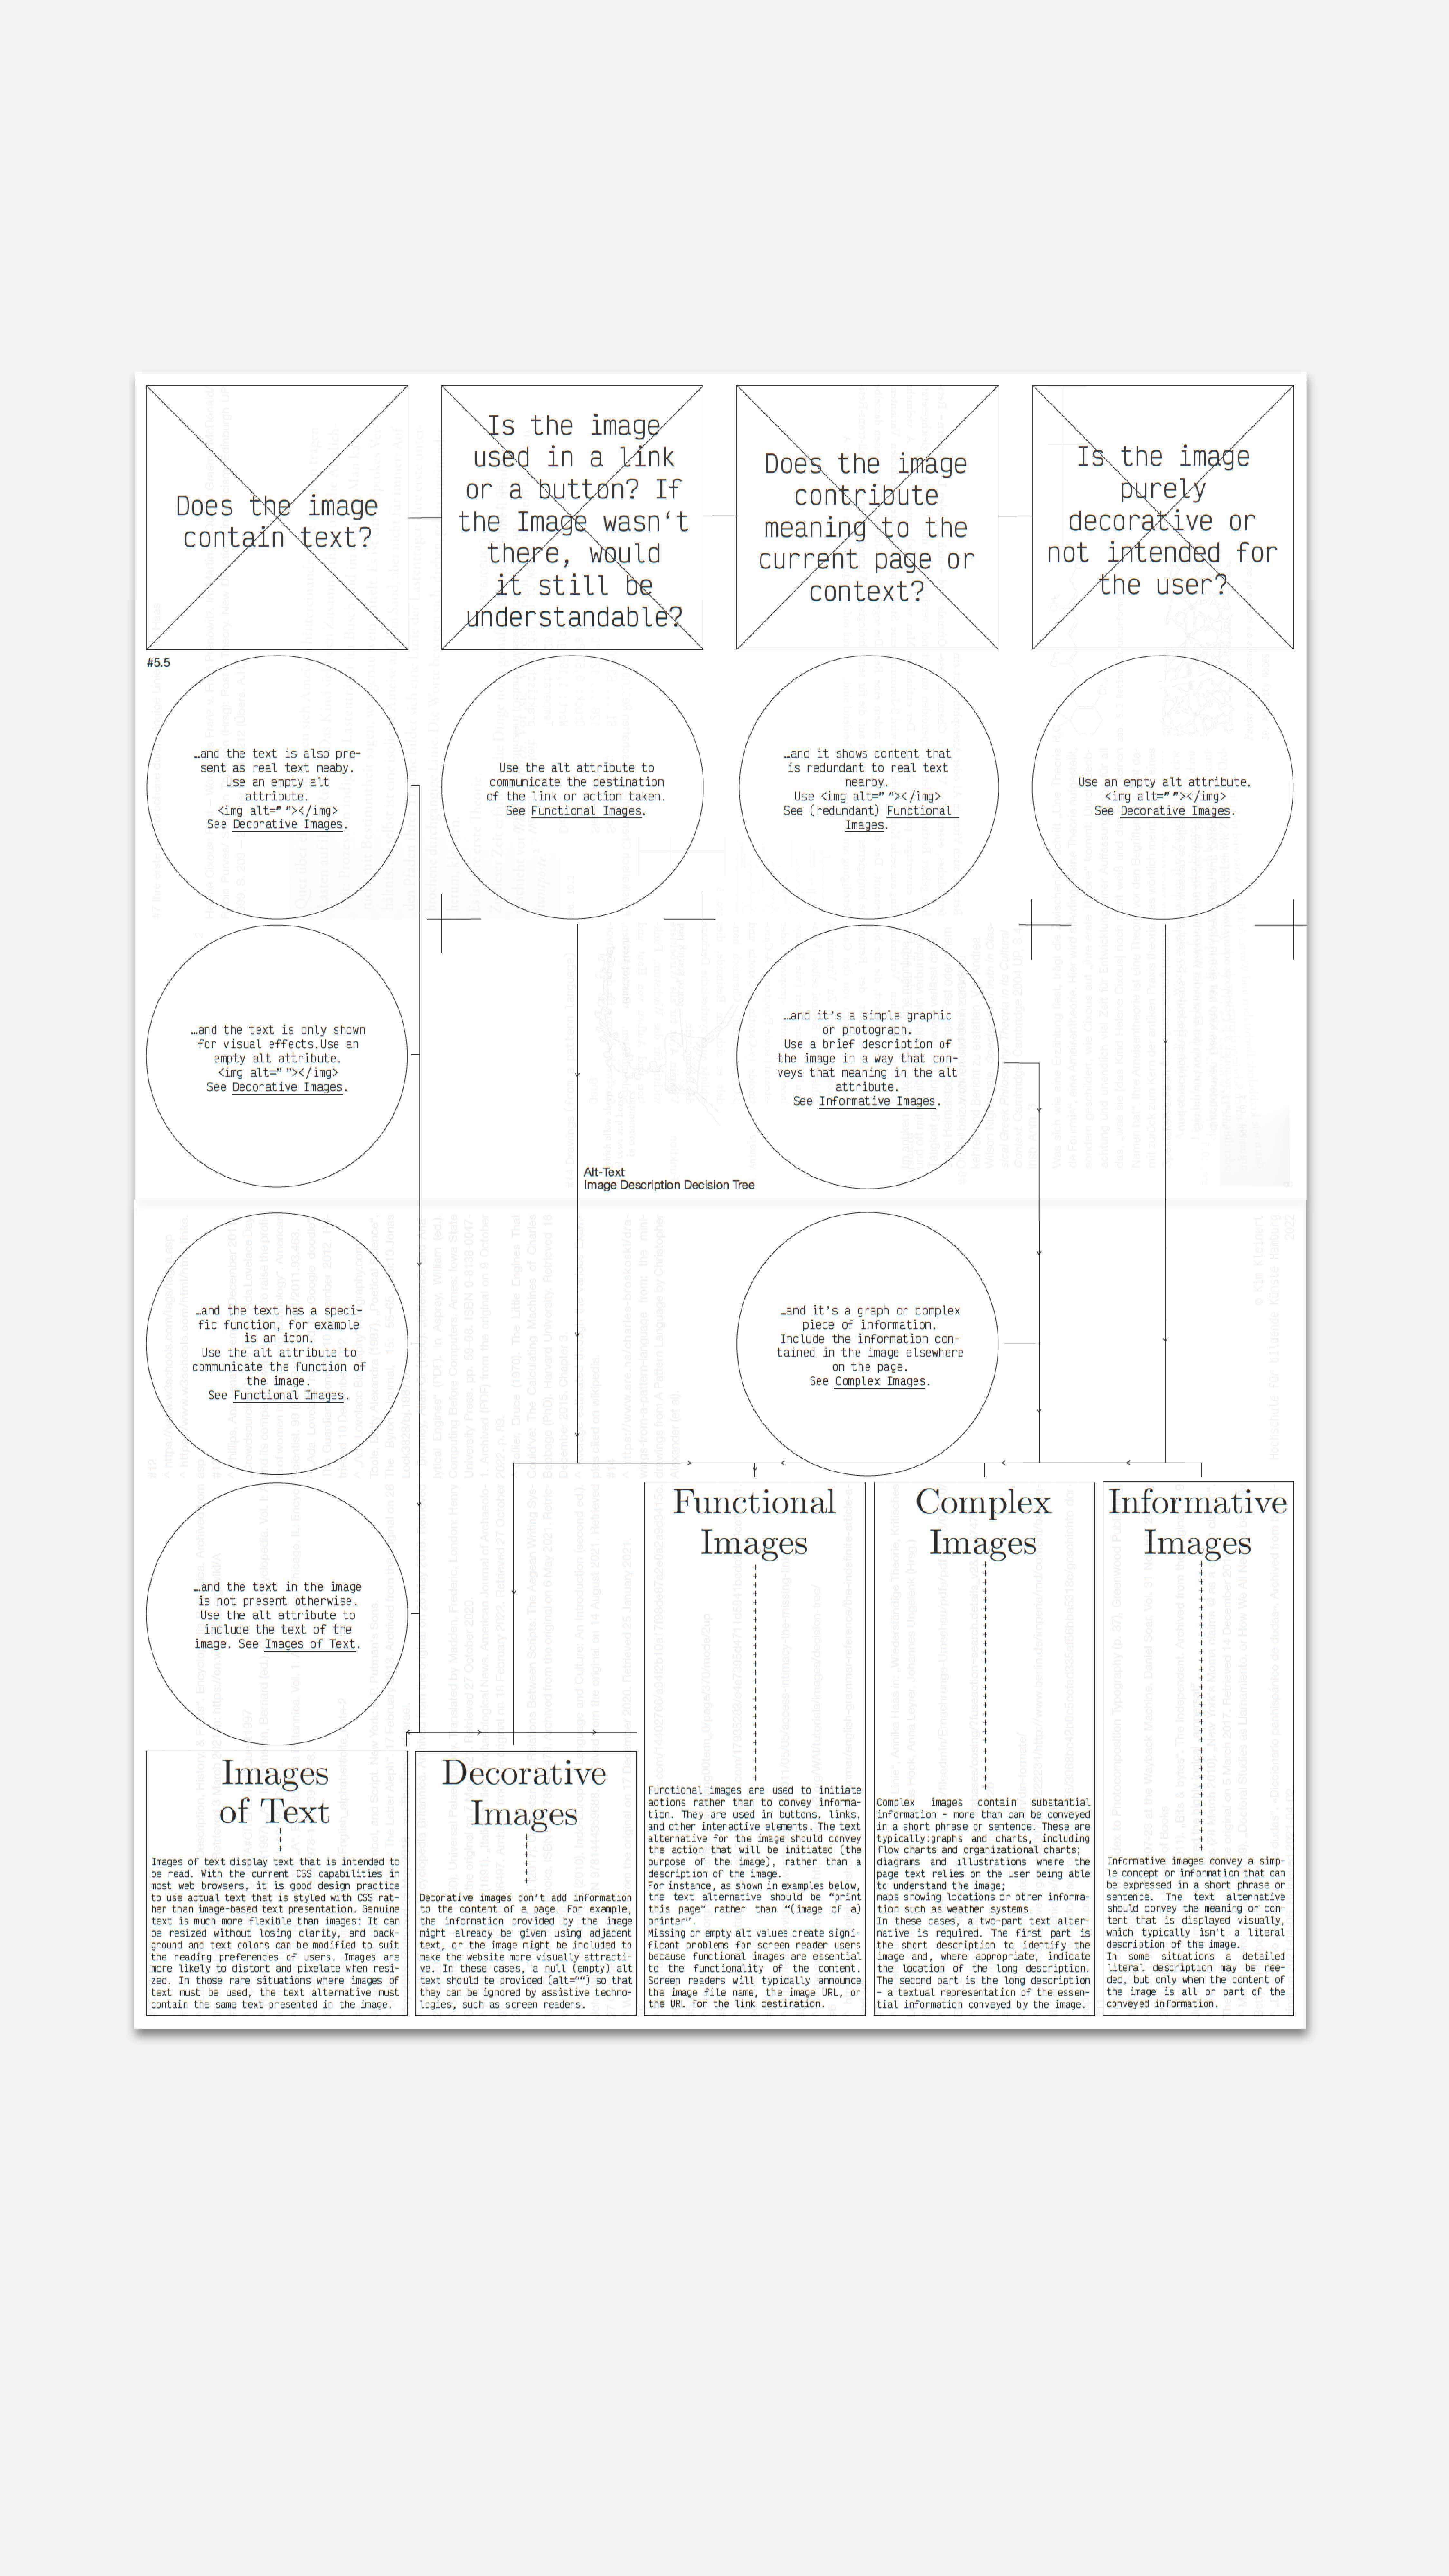 A diagram or descision tree spans two pages of the publication. Big circles and rectangles contain short texts, they are connected through thin lines.